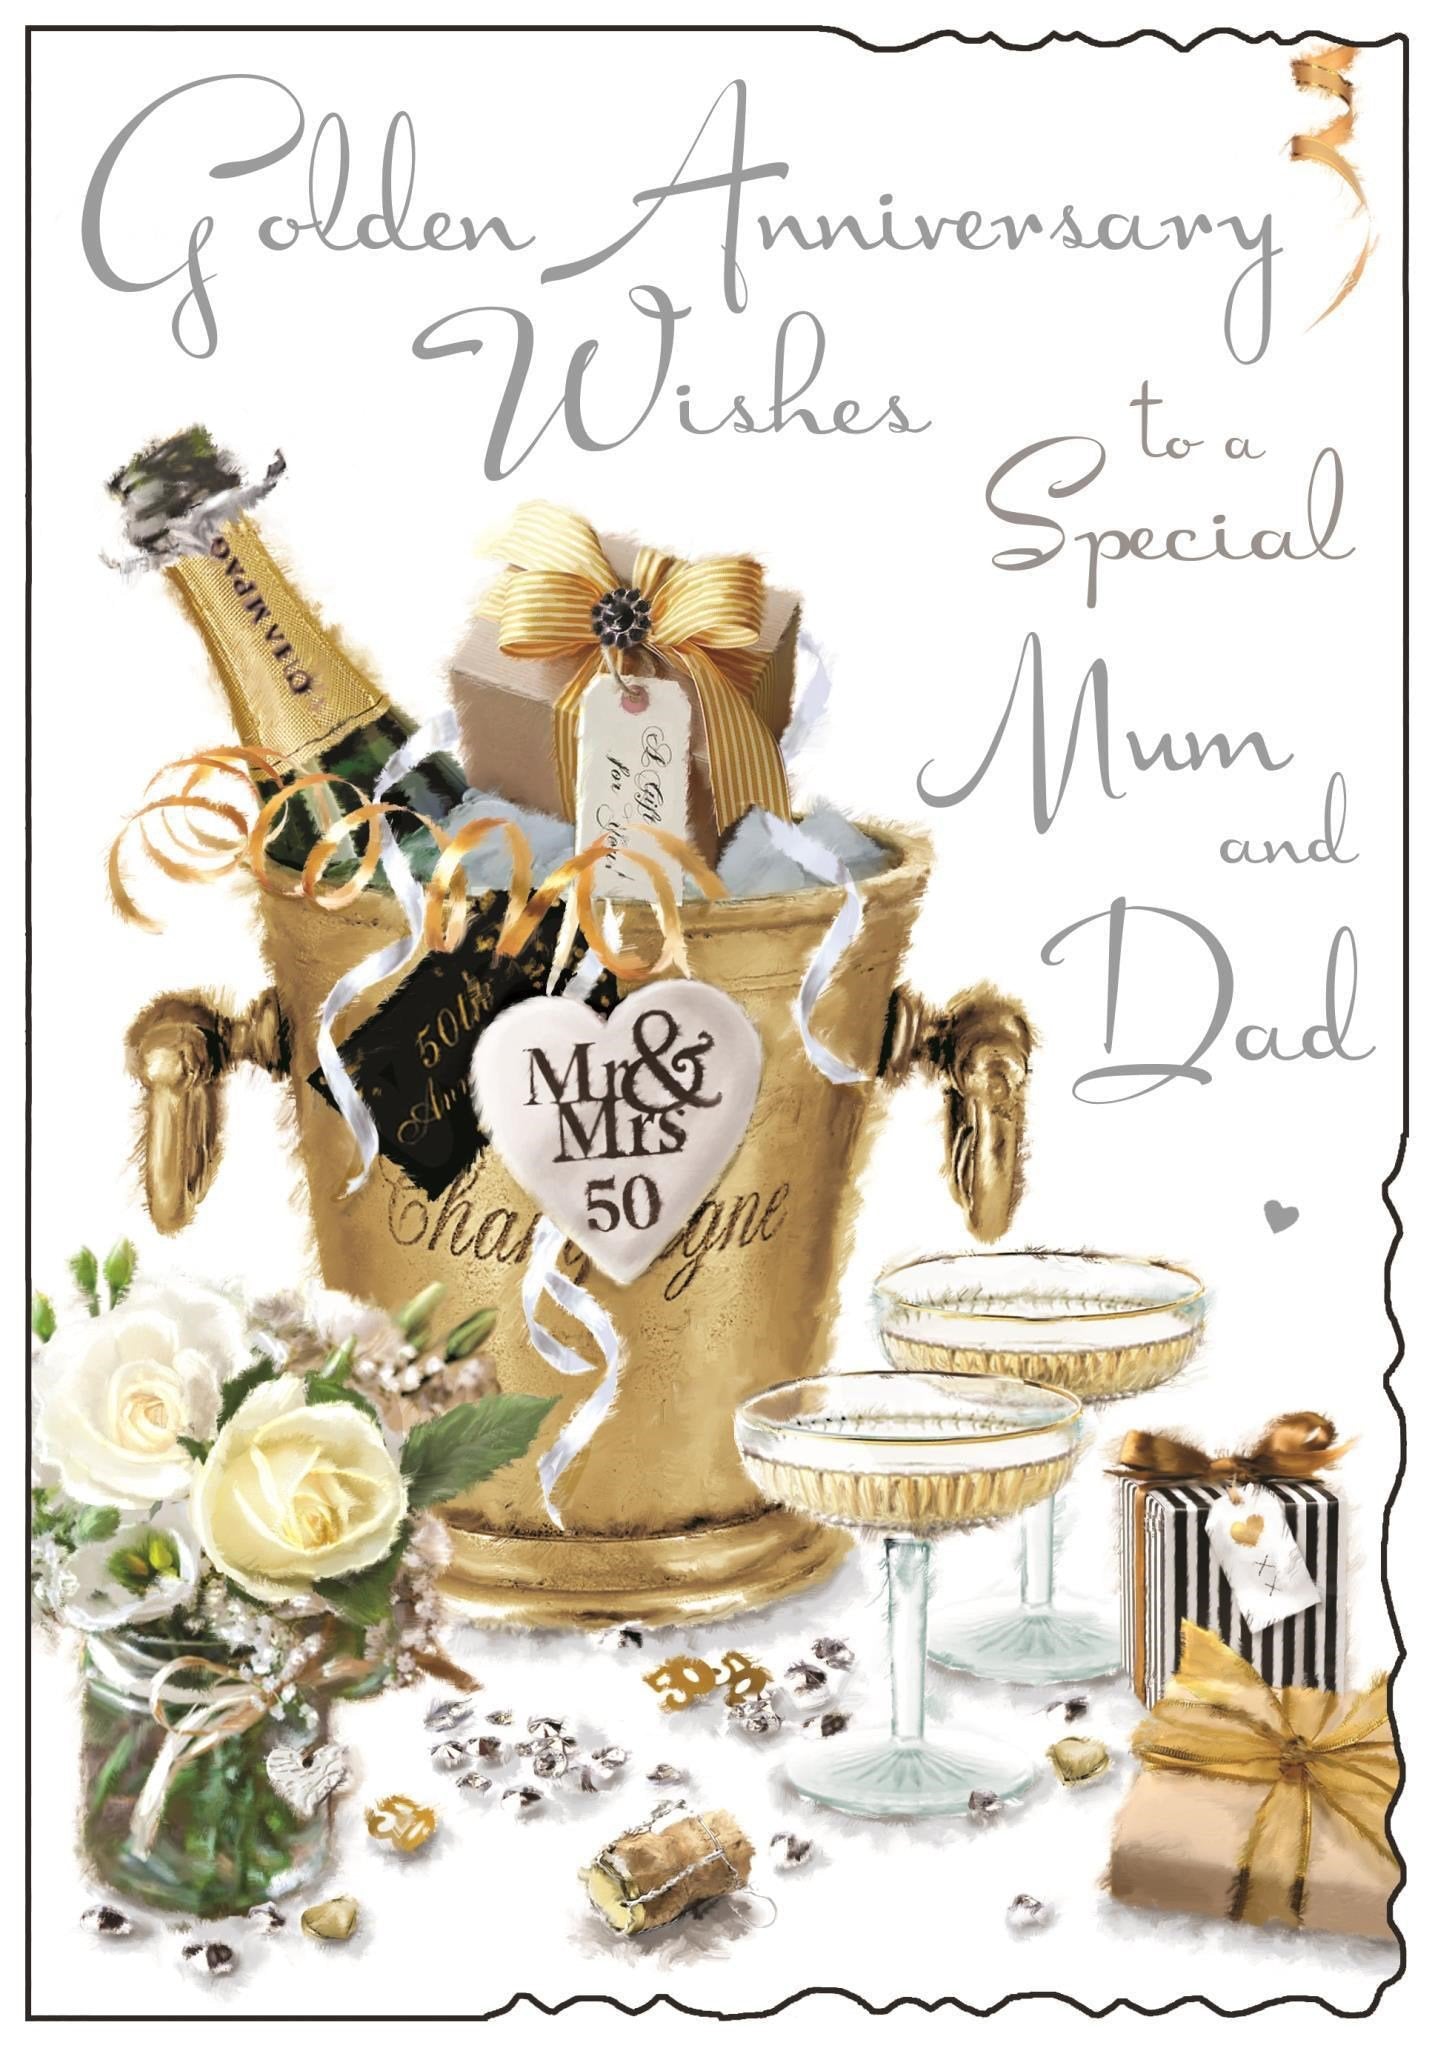 Front of Mum & Dad Golden Anniversary Toast Greetings Card